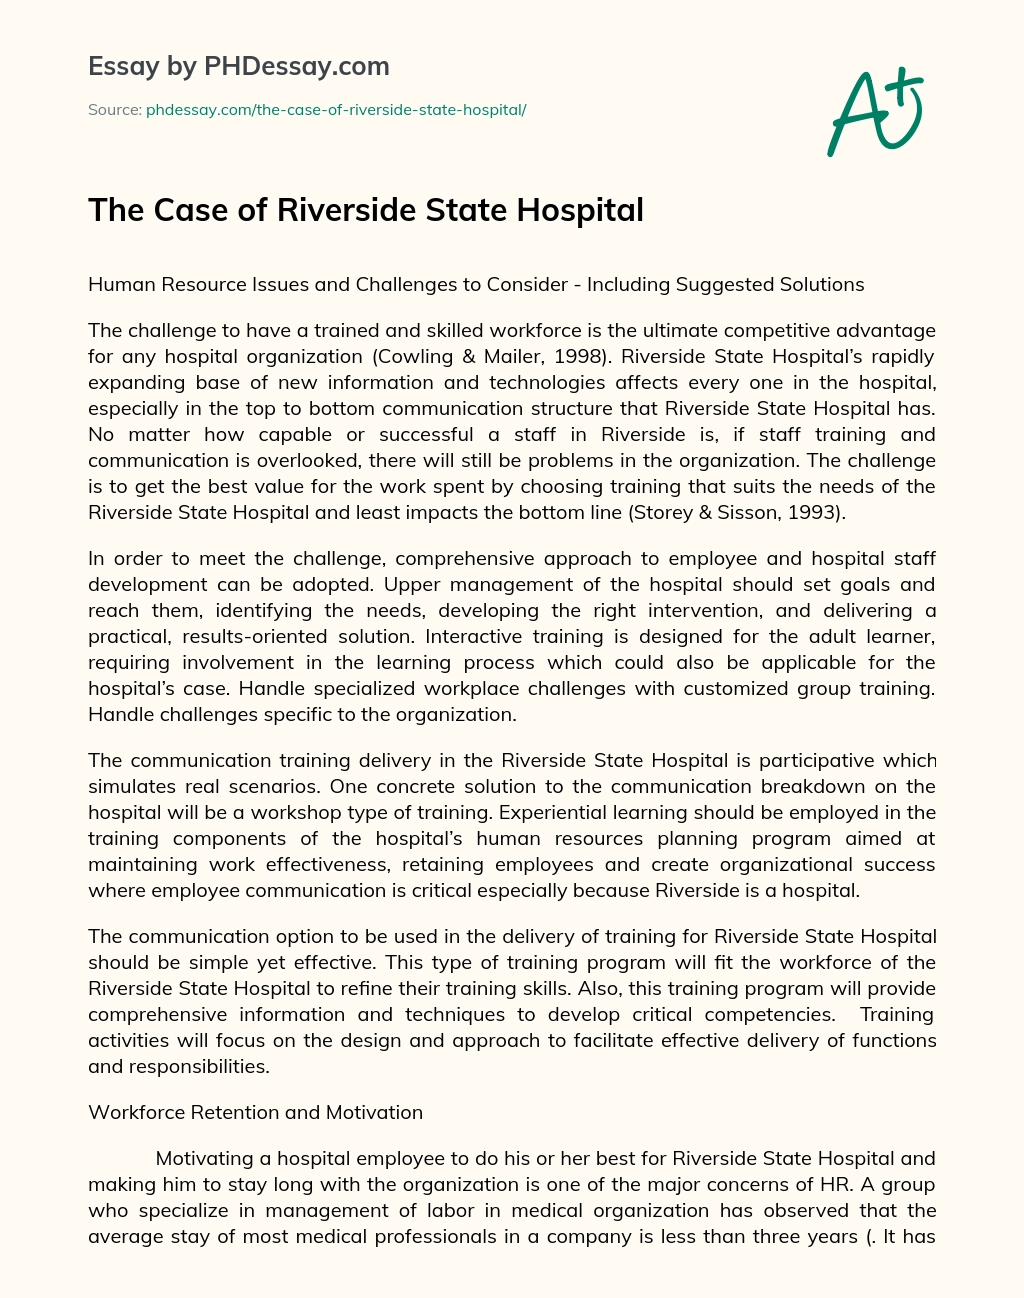 The Case of Riverside State Hospital essay